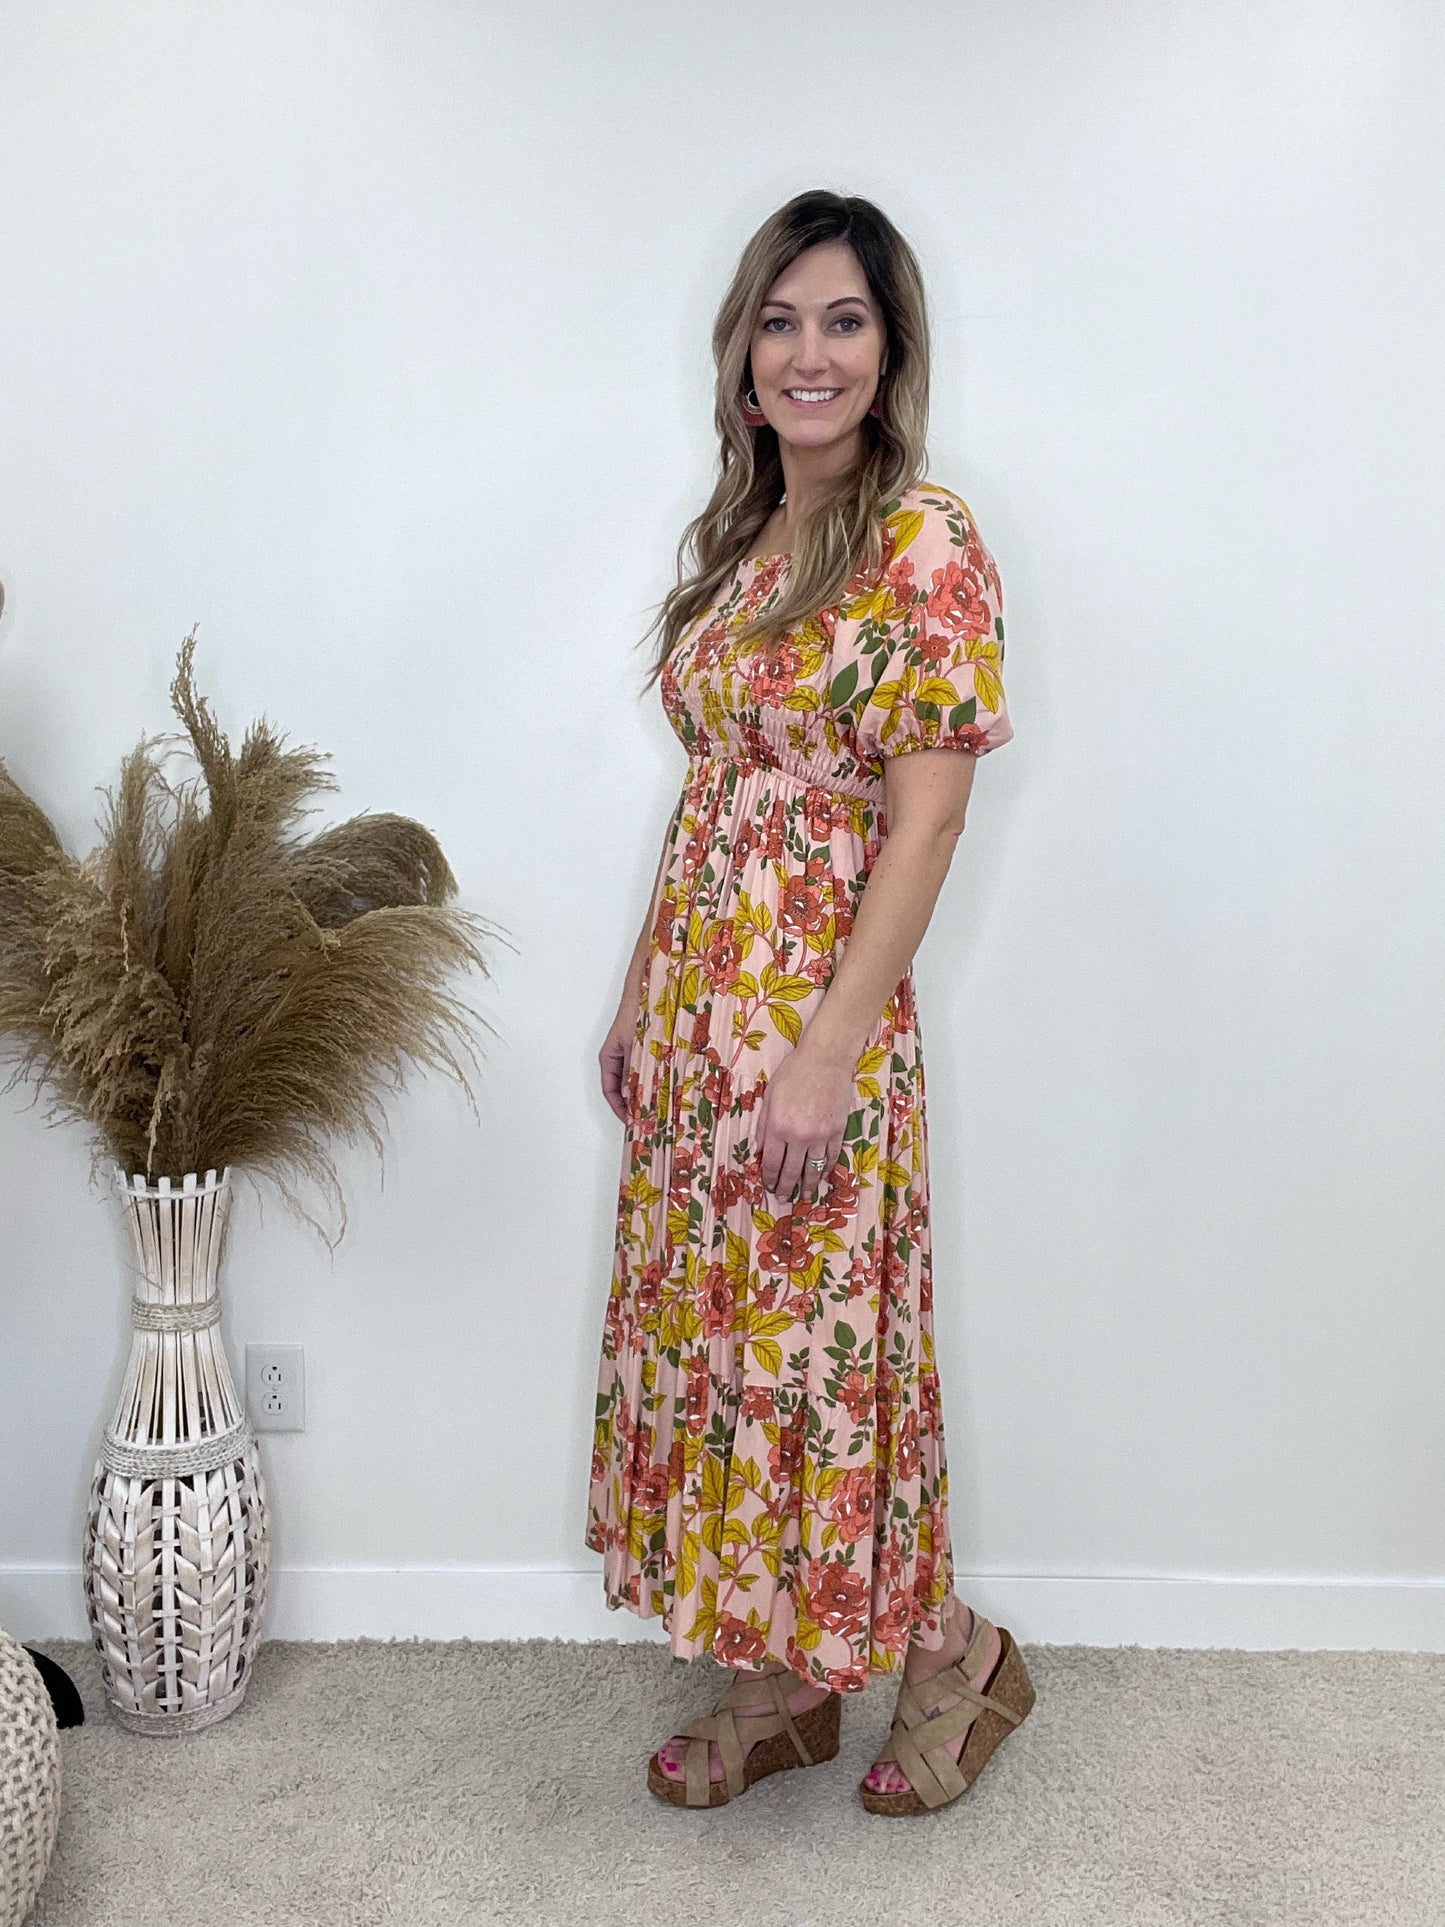 The Indy Retro Floral Dress